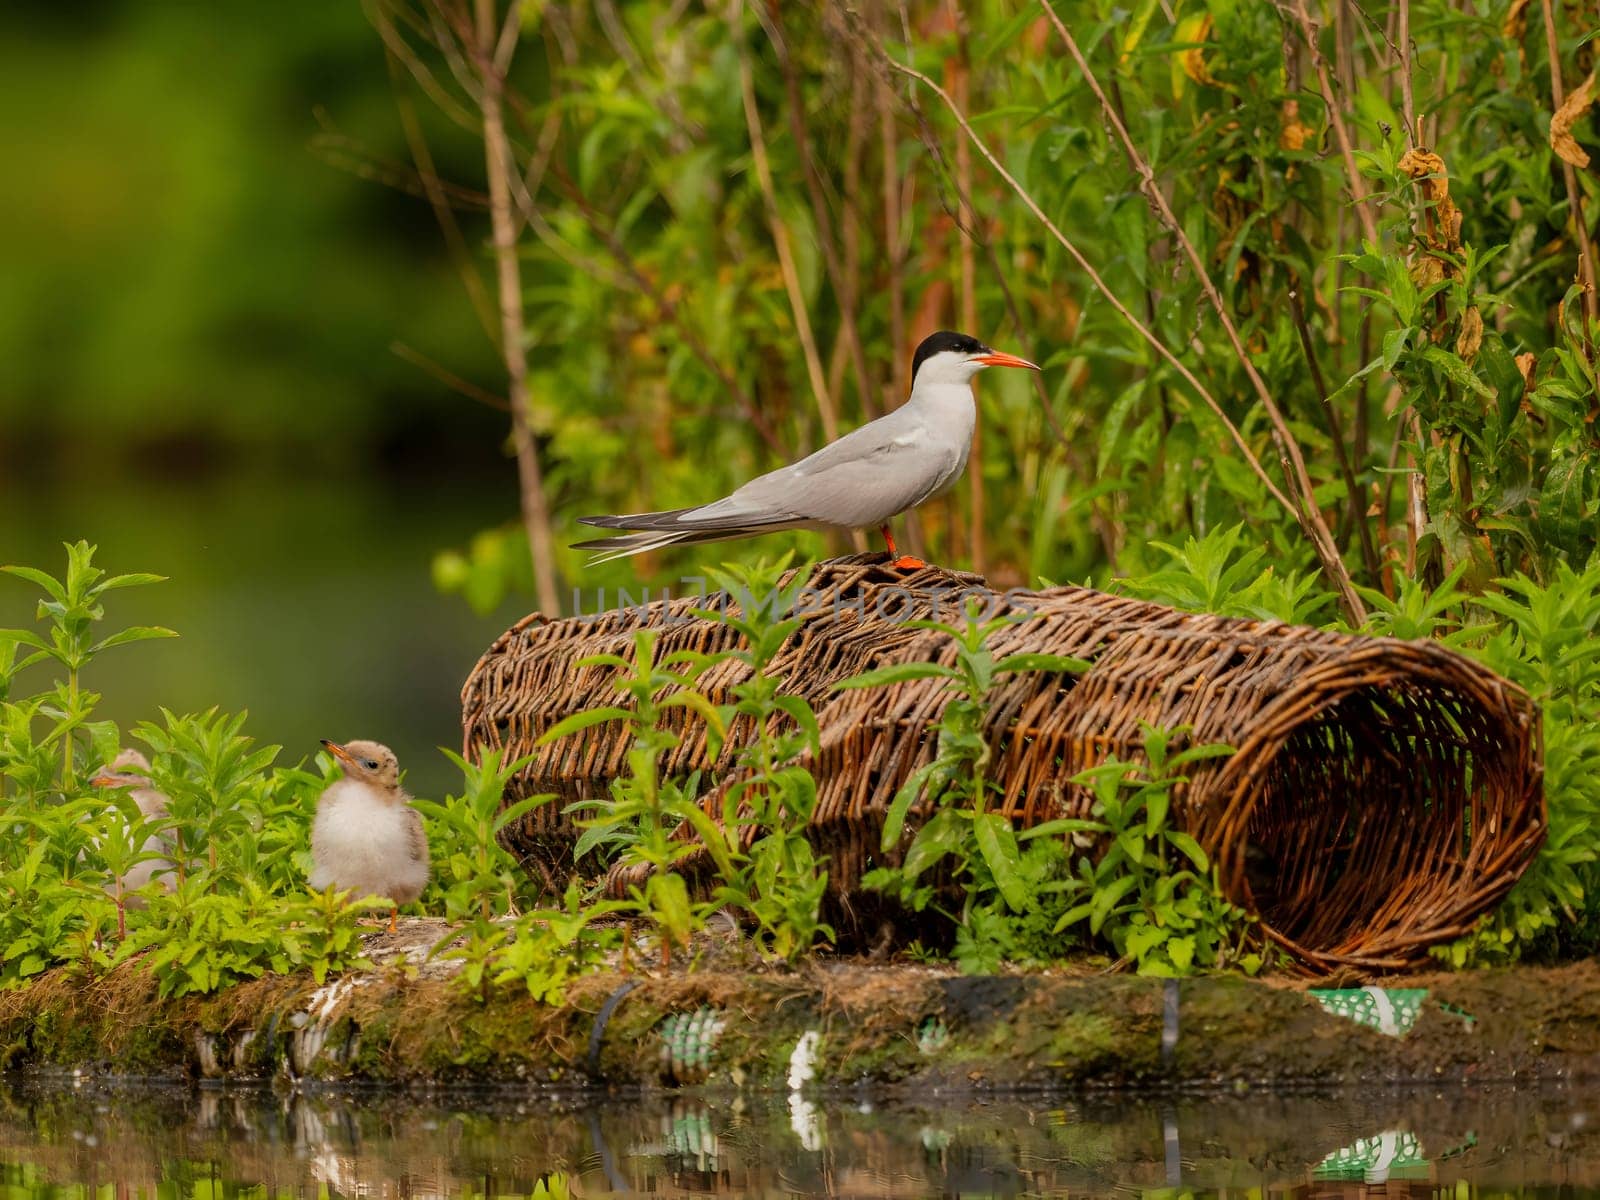 Common tern on the breeding ground with their young. by NatureTron